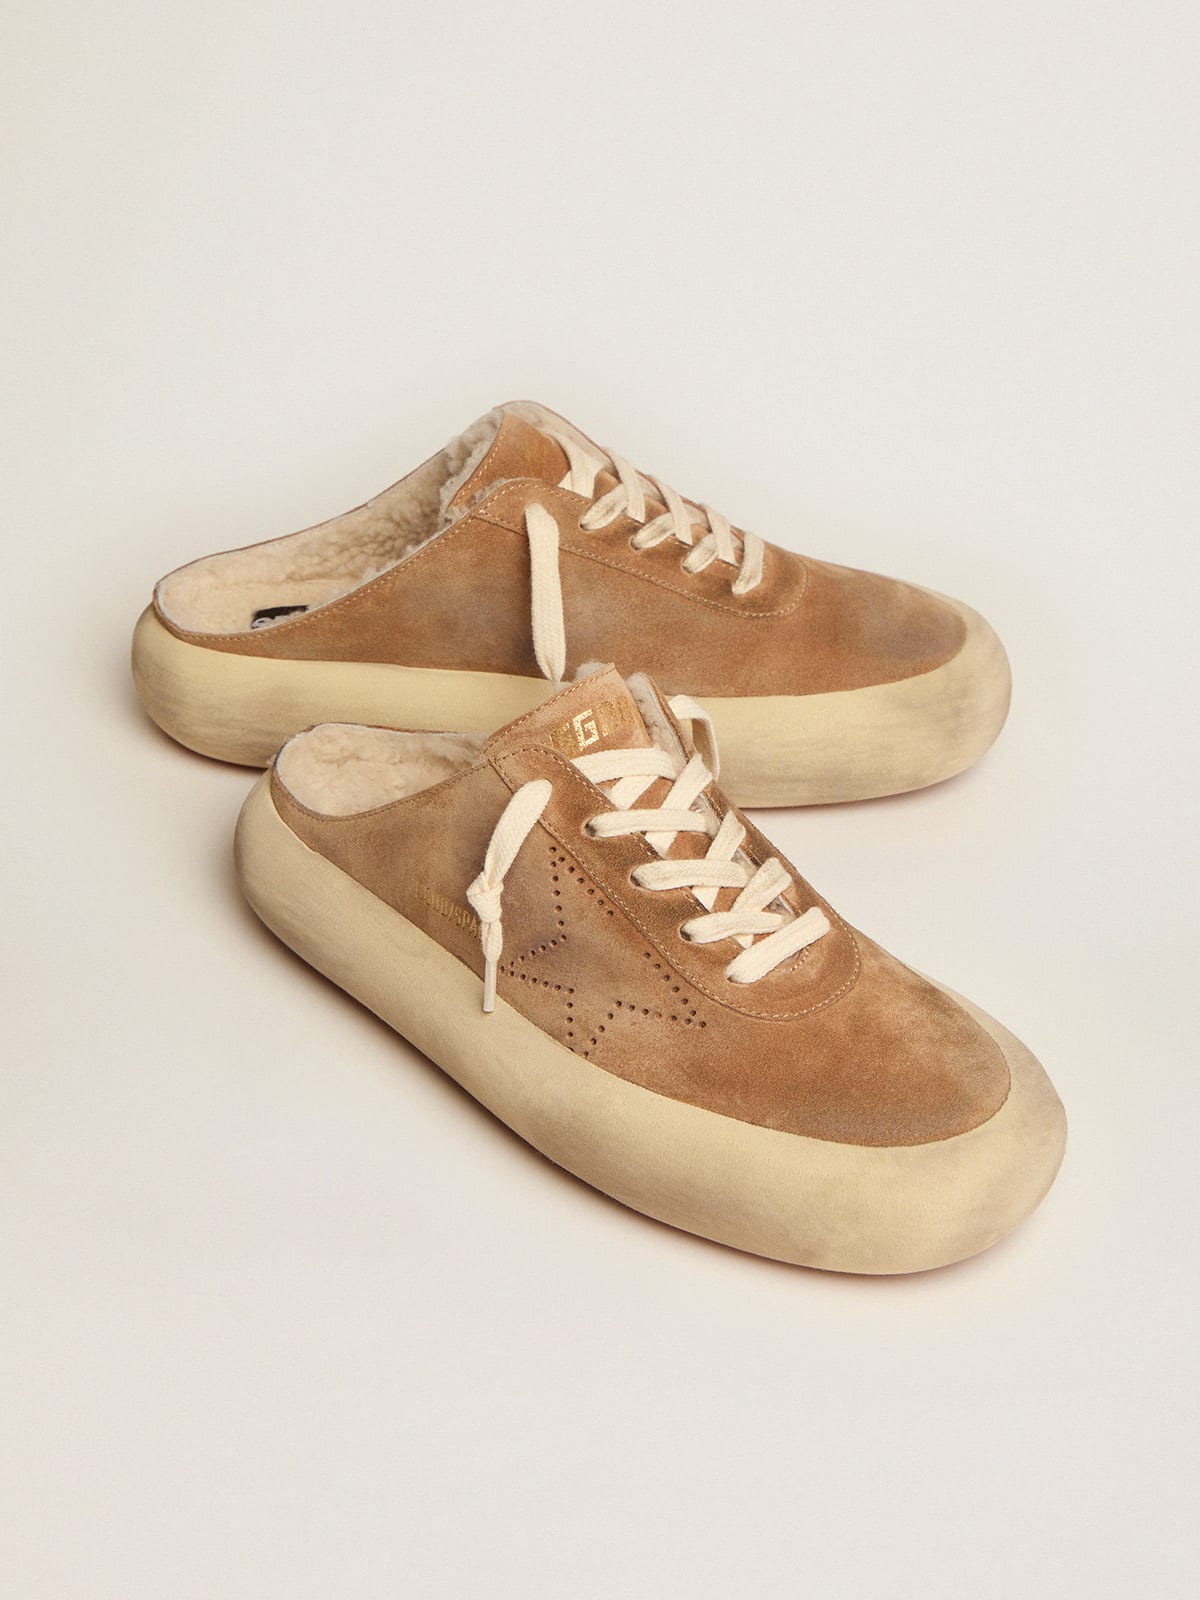 Golden Goose - Scarpe Space-Star Sabot Donna in suede color tabacco e fodera in shearling in 